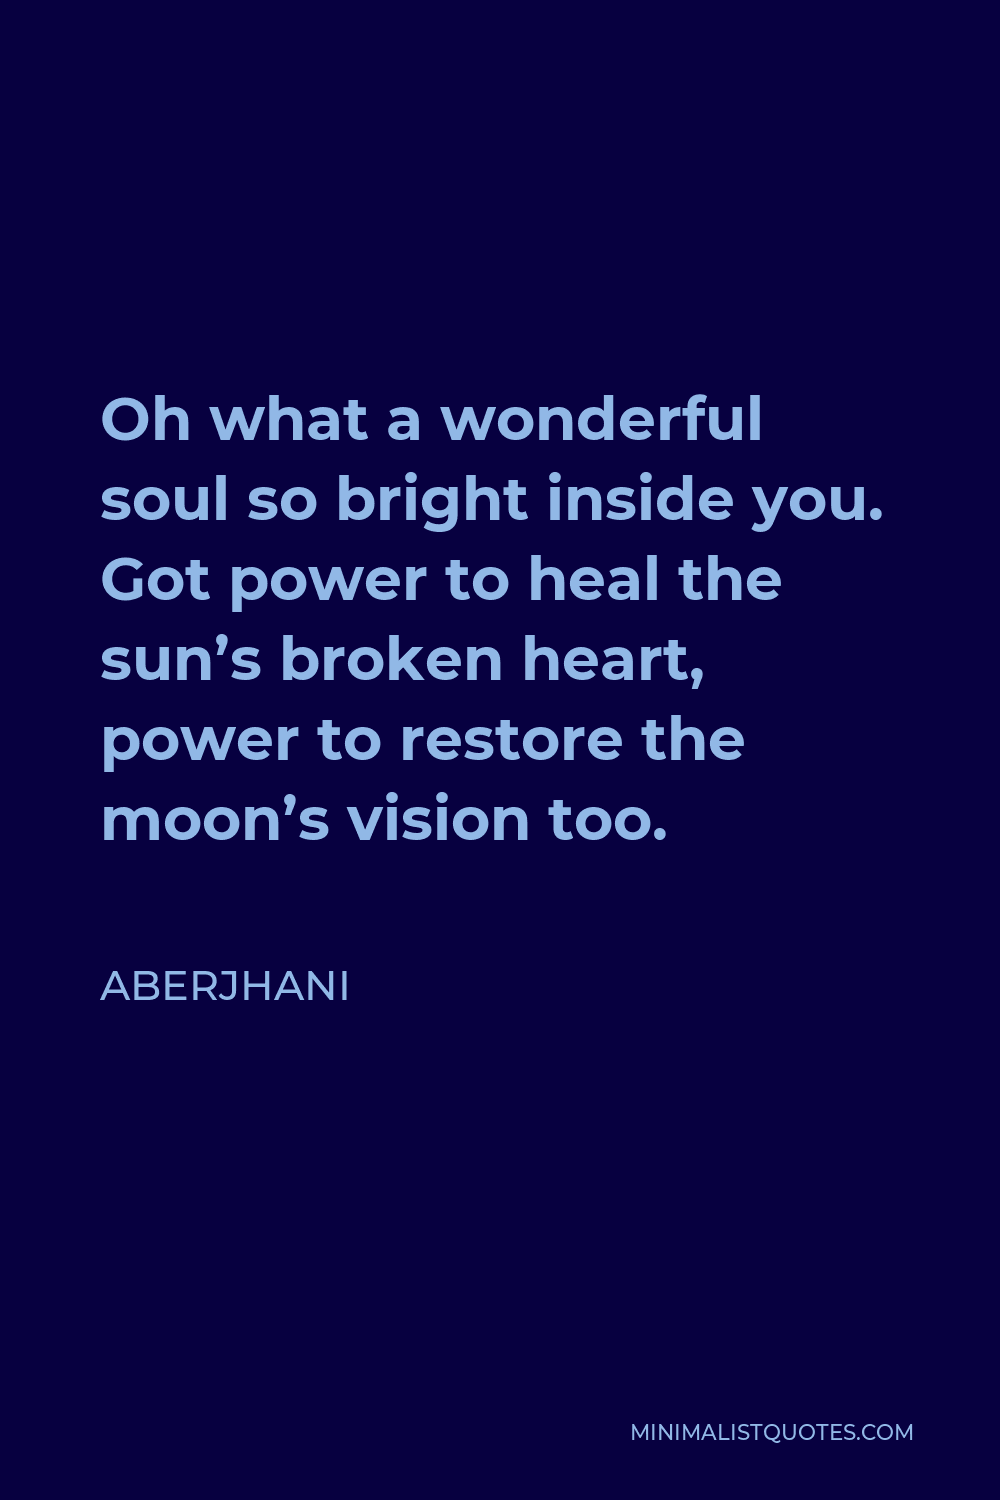 Aberjhani Quote - Oh what a wonderful soul so bright inside you. Got power to heal the sun’s broken heart, power to restore the moon’s vision too.